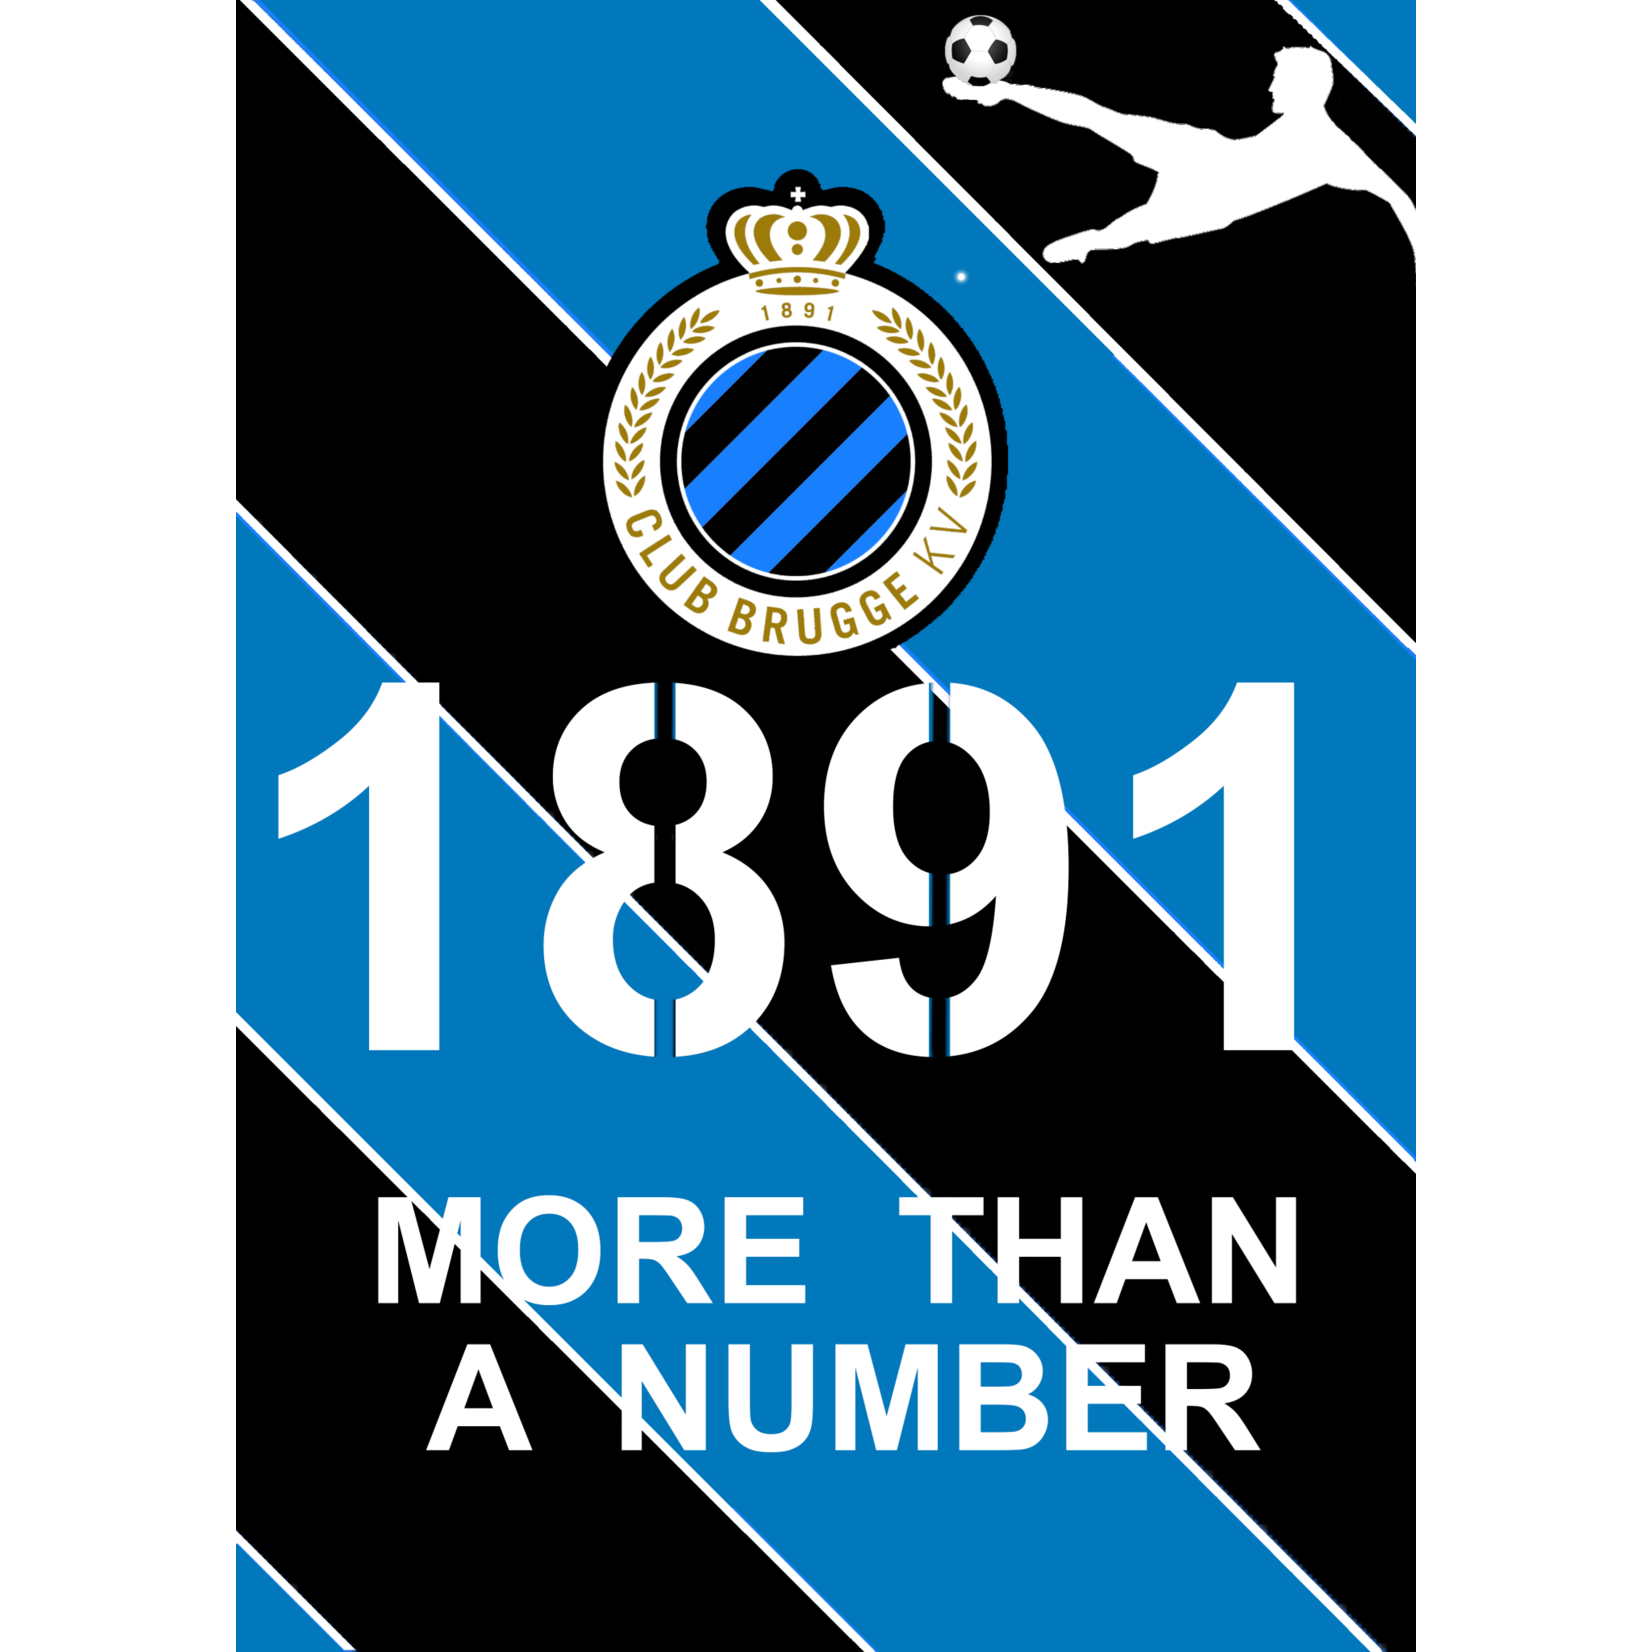 Club Brugge 1891 More Than a Number